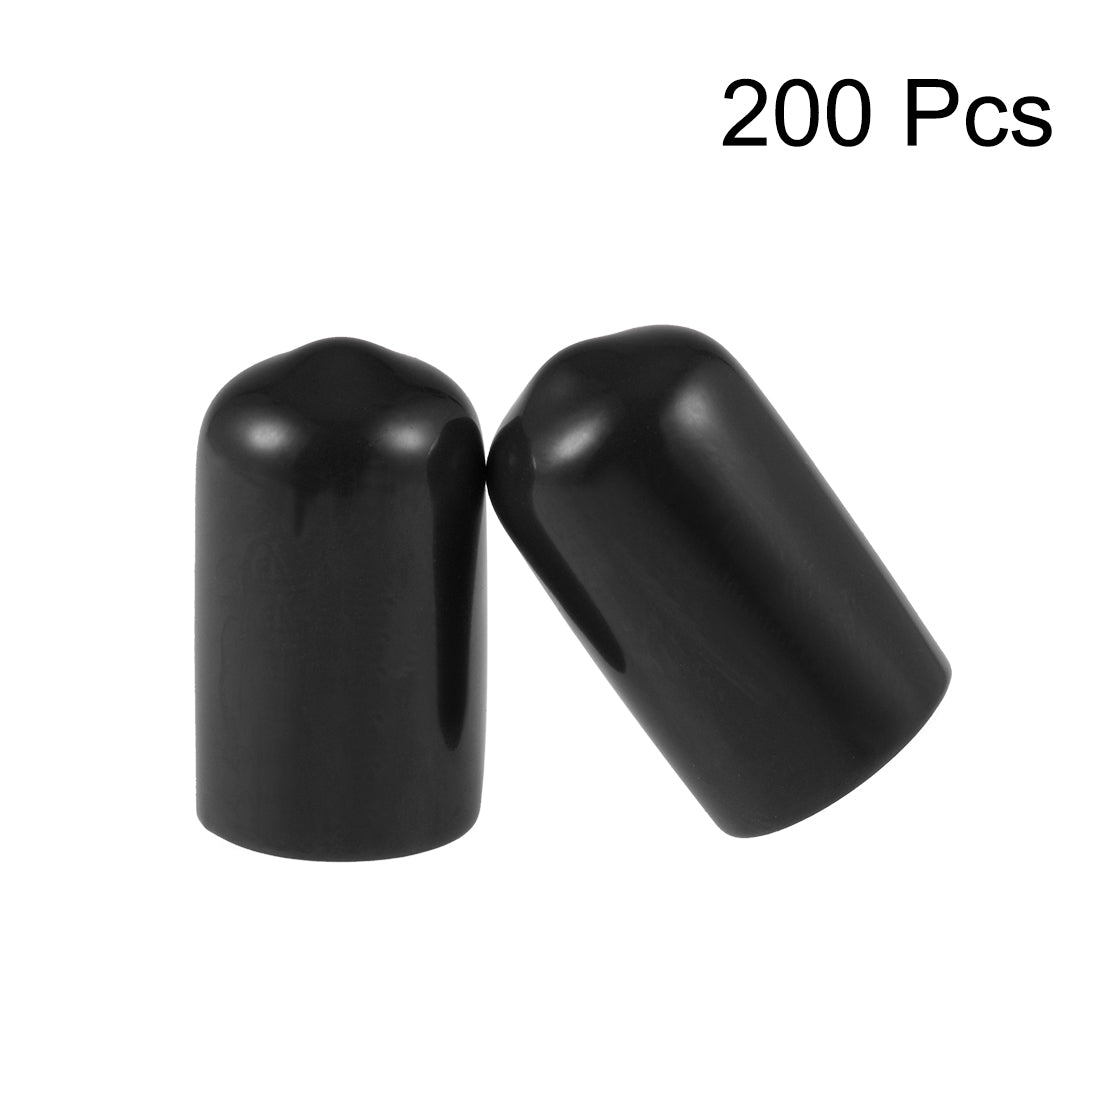 uxcell Uxcell 200pcs Rubber End Caps 10mm ID 20mm Height Screw Thread Protectors Black